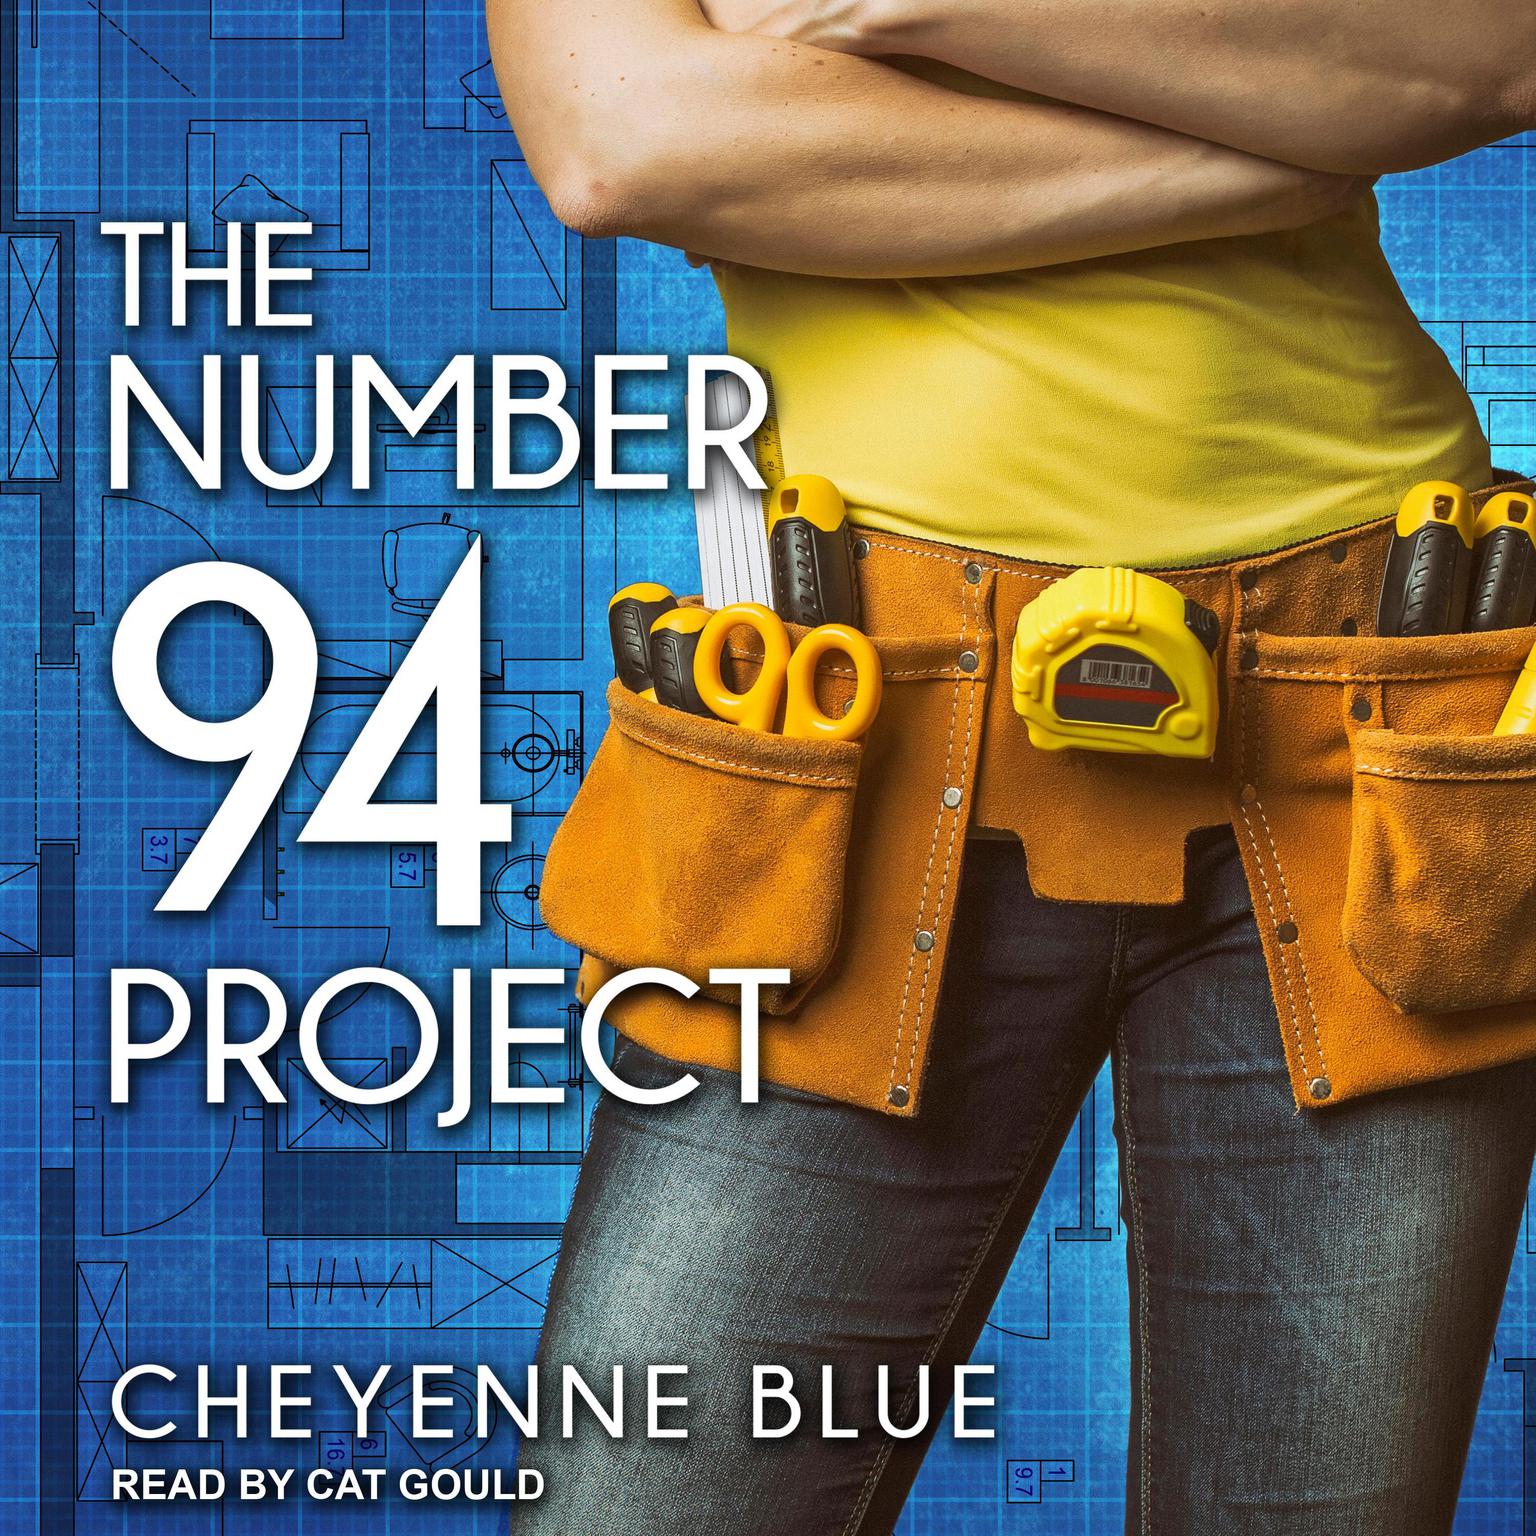 Cheyenne Blue, Cat Gould: The Number 94 Project (AudiobookFormat, 2021, Ylva)